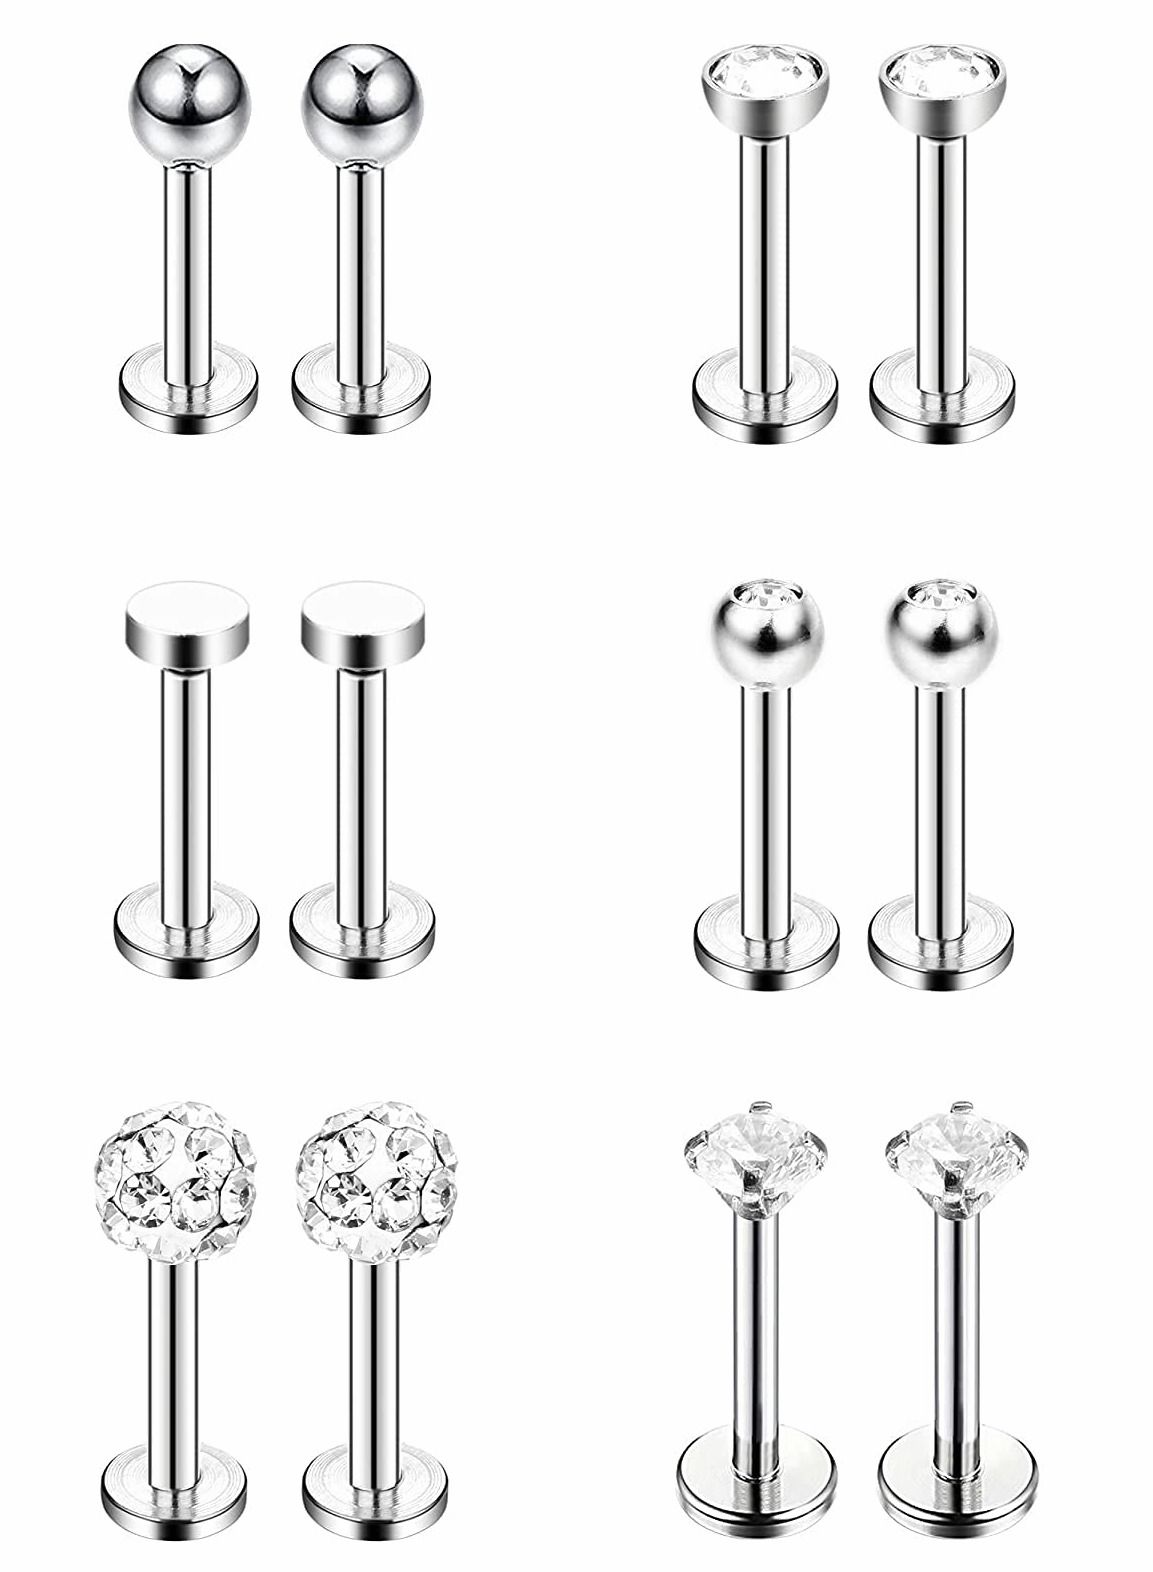 6 Pairs Stainless Steel Nose Studs Tragus Bars Labret Bars Crystal Ball Body Piercing Jewelry, Nose Lips Piercing Assorted Design Piercing Jewelry, 6 Designs, 16 Gauge 